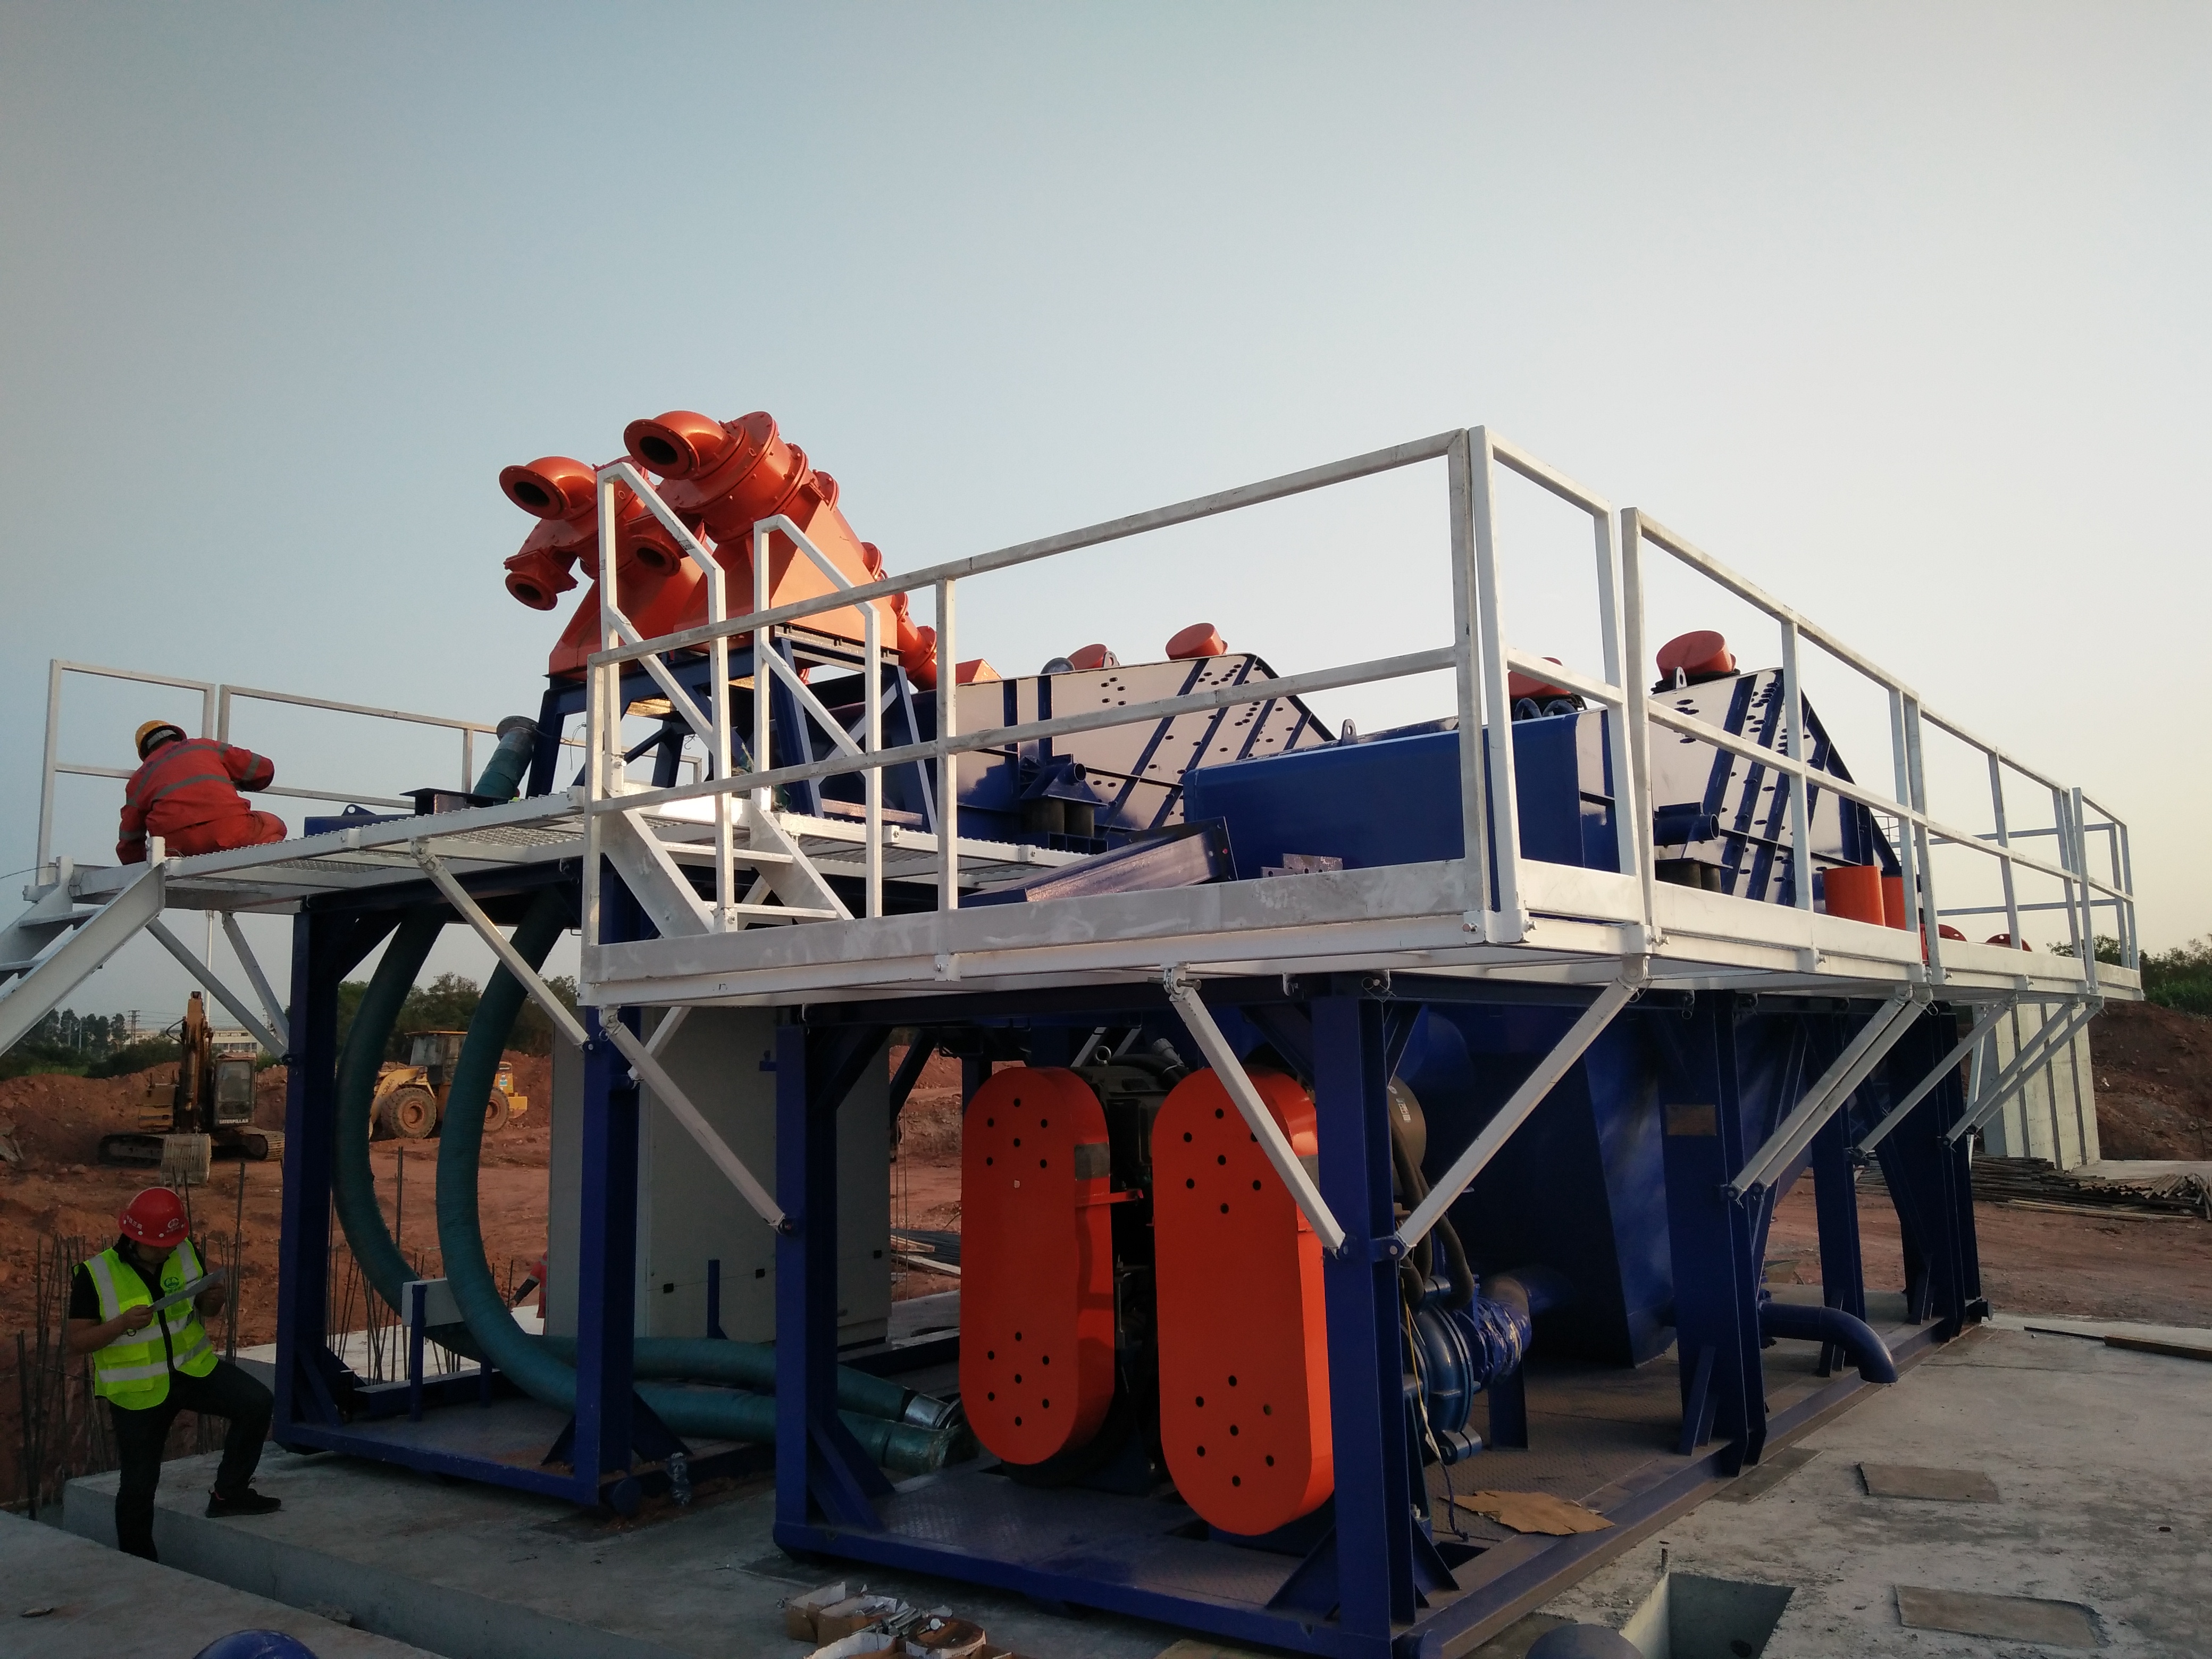 KOSUN 1000HP Drilling rig solids control system case in North Africa